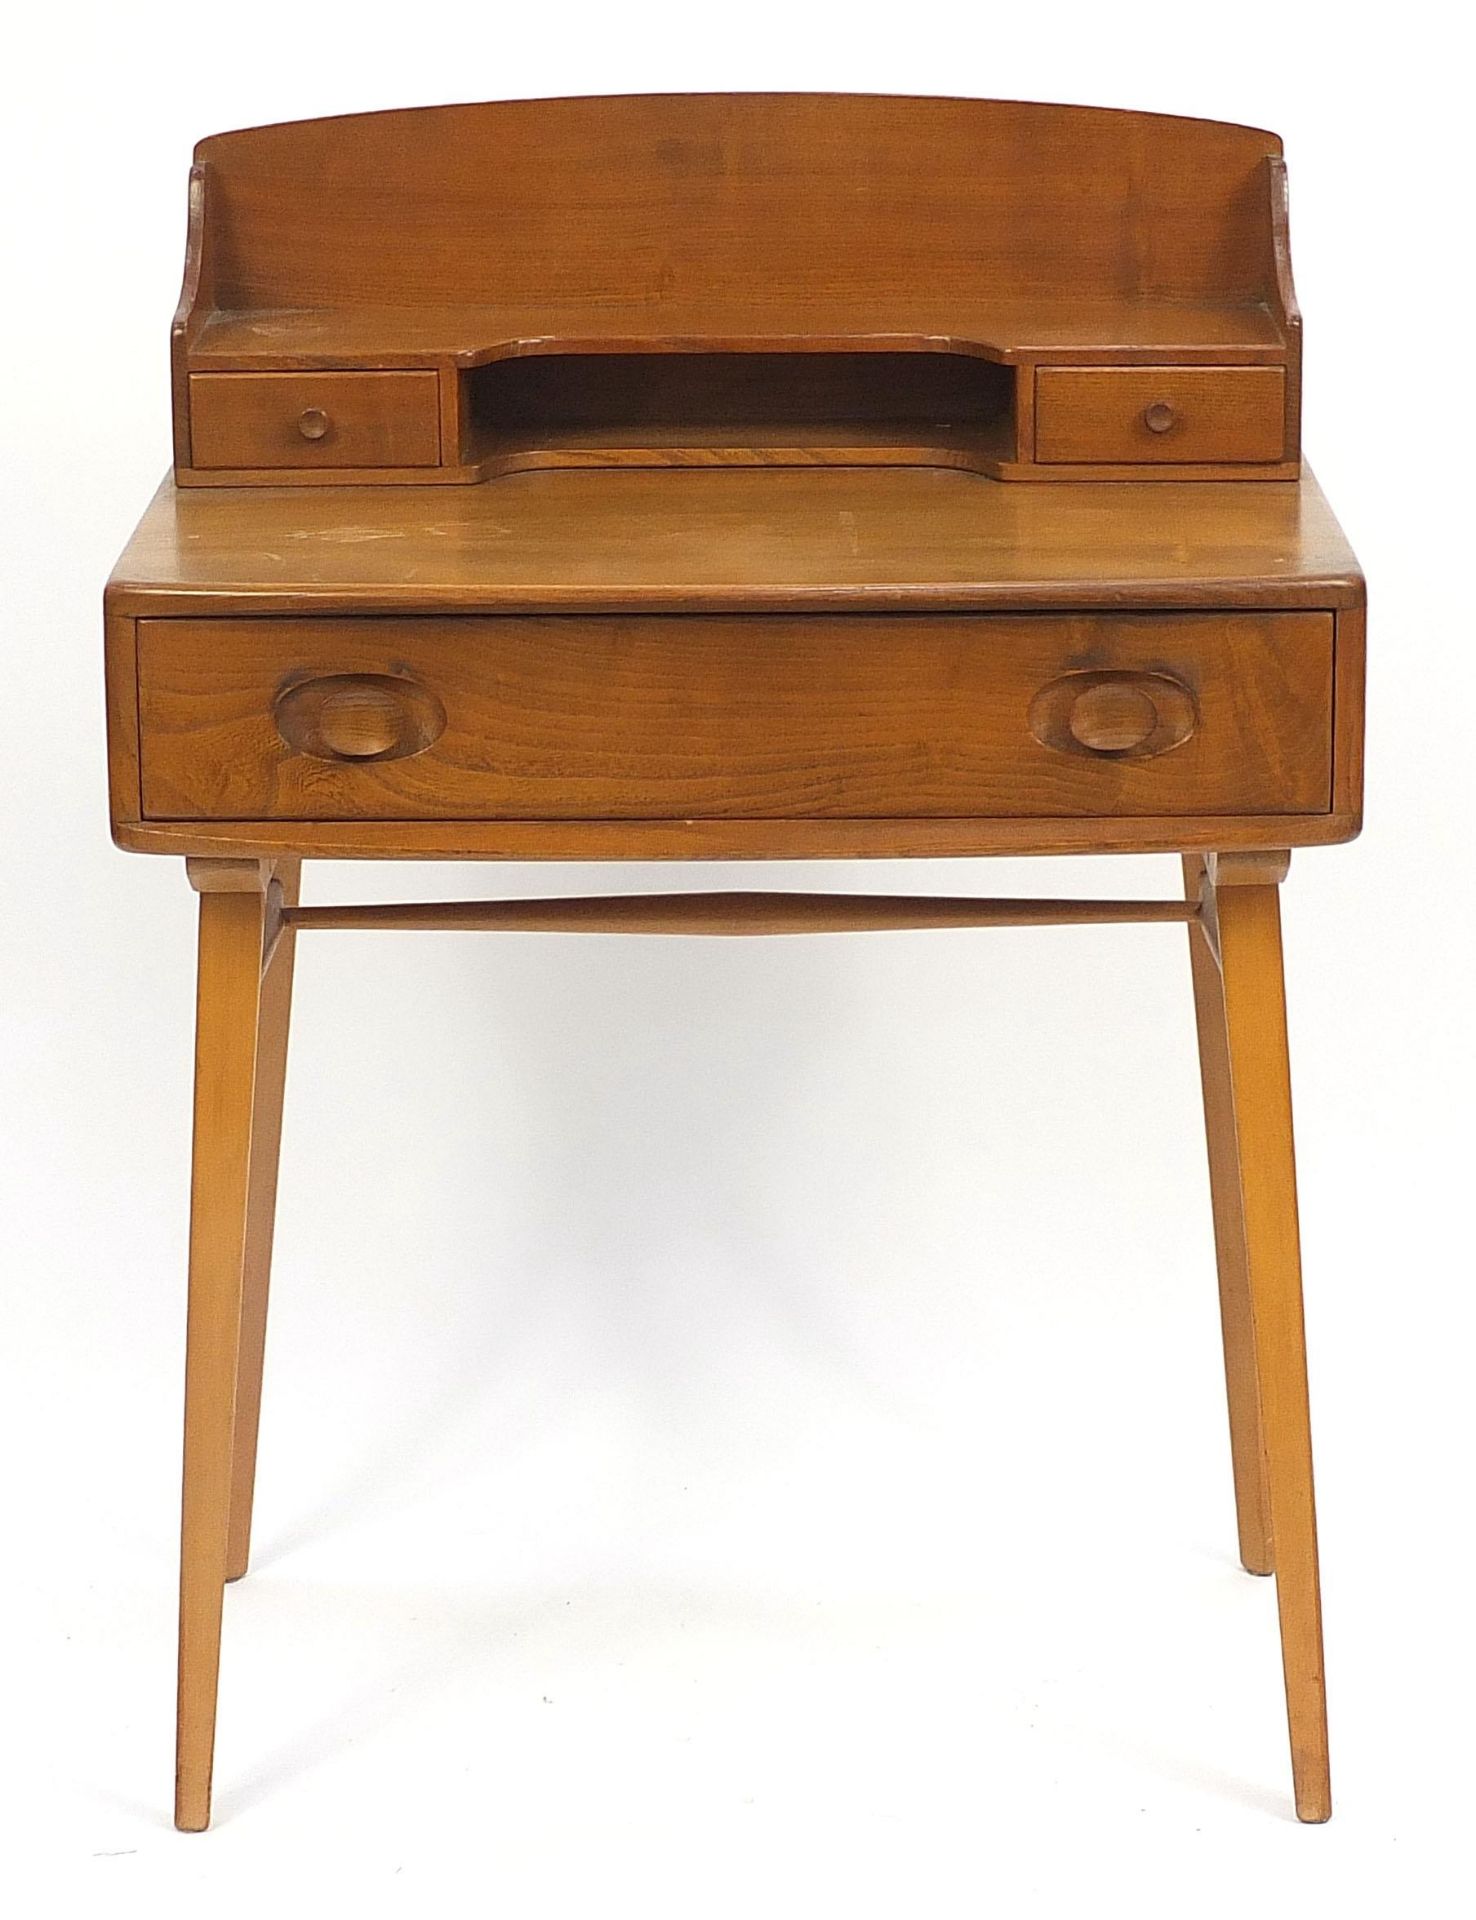 Ercol light elm dressing table with three drawers, 93cm H x 68.5cm W x 48cm D - Image 2 of 6